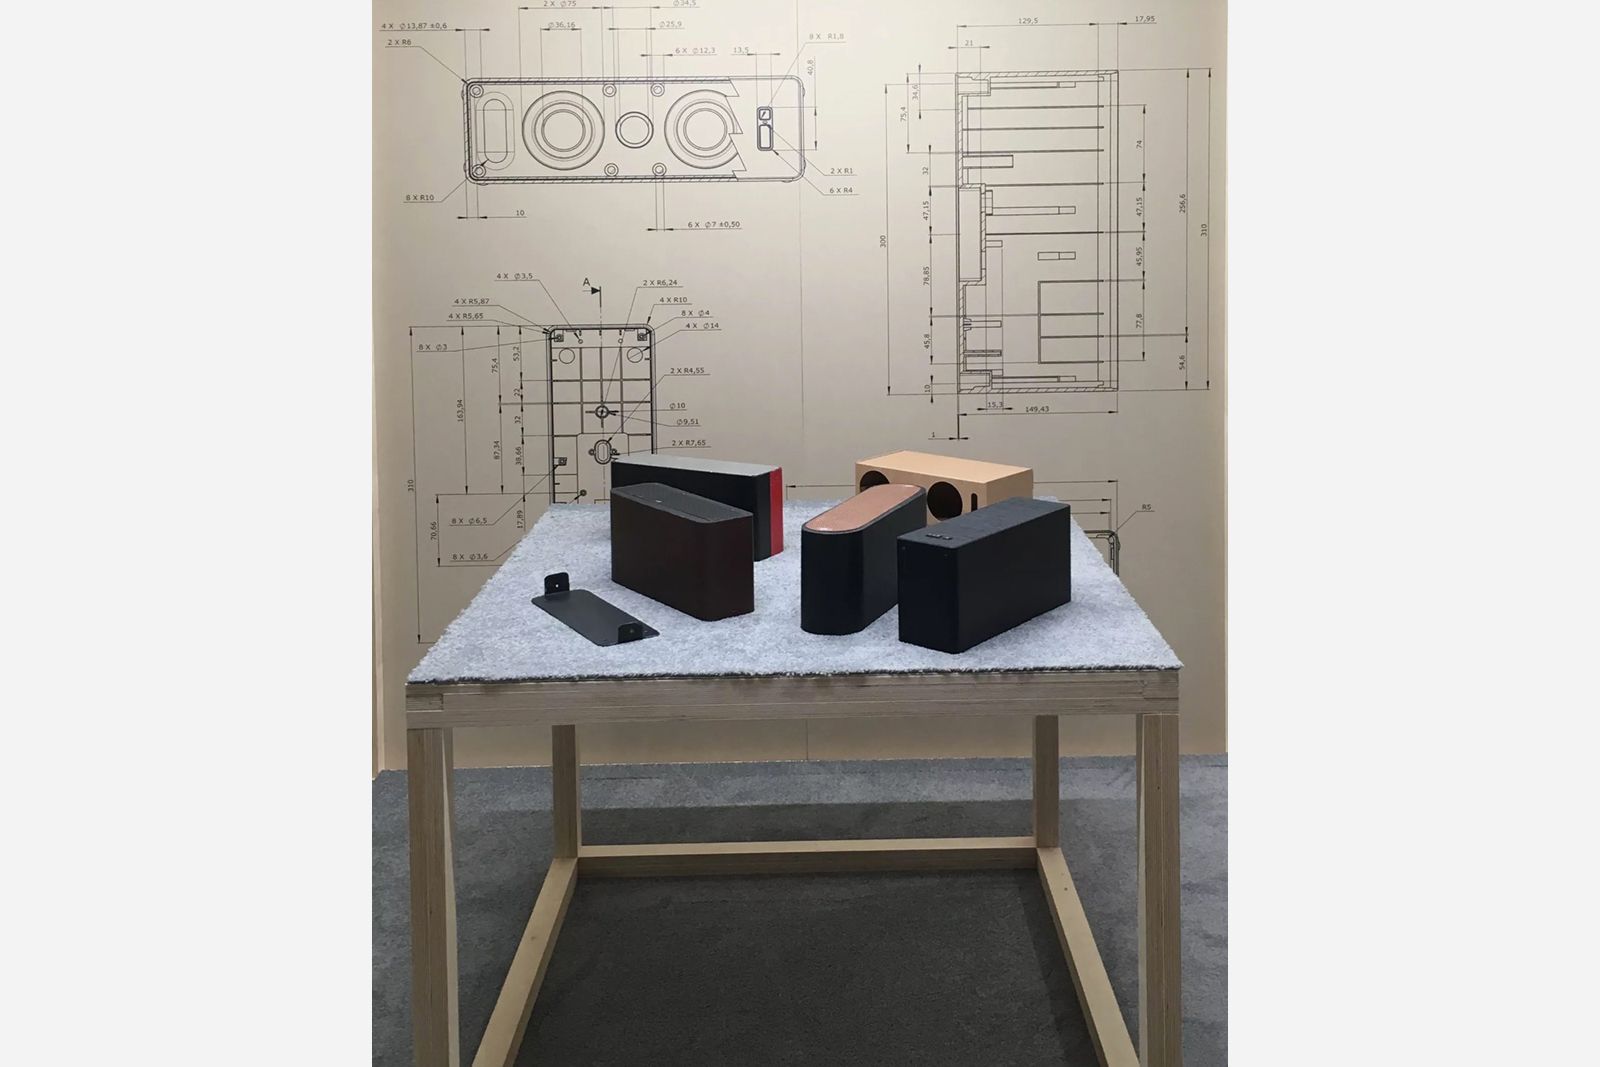 Ikea And Sonos Display Their First Smart Speaker Prototypes image 2